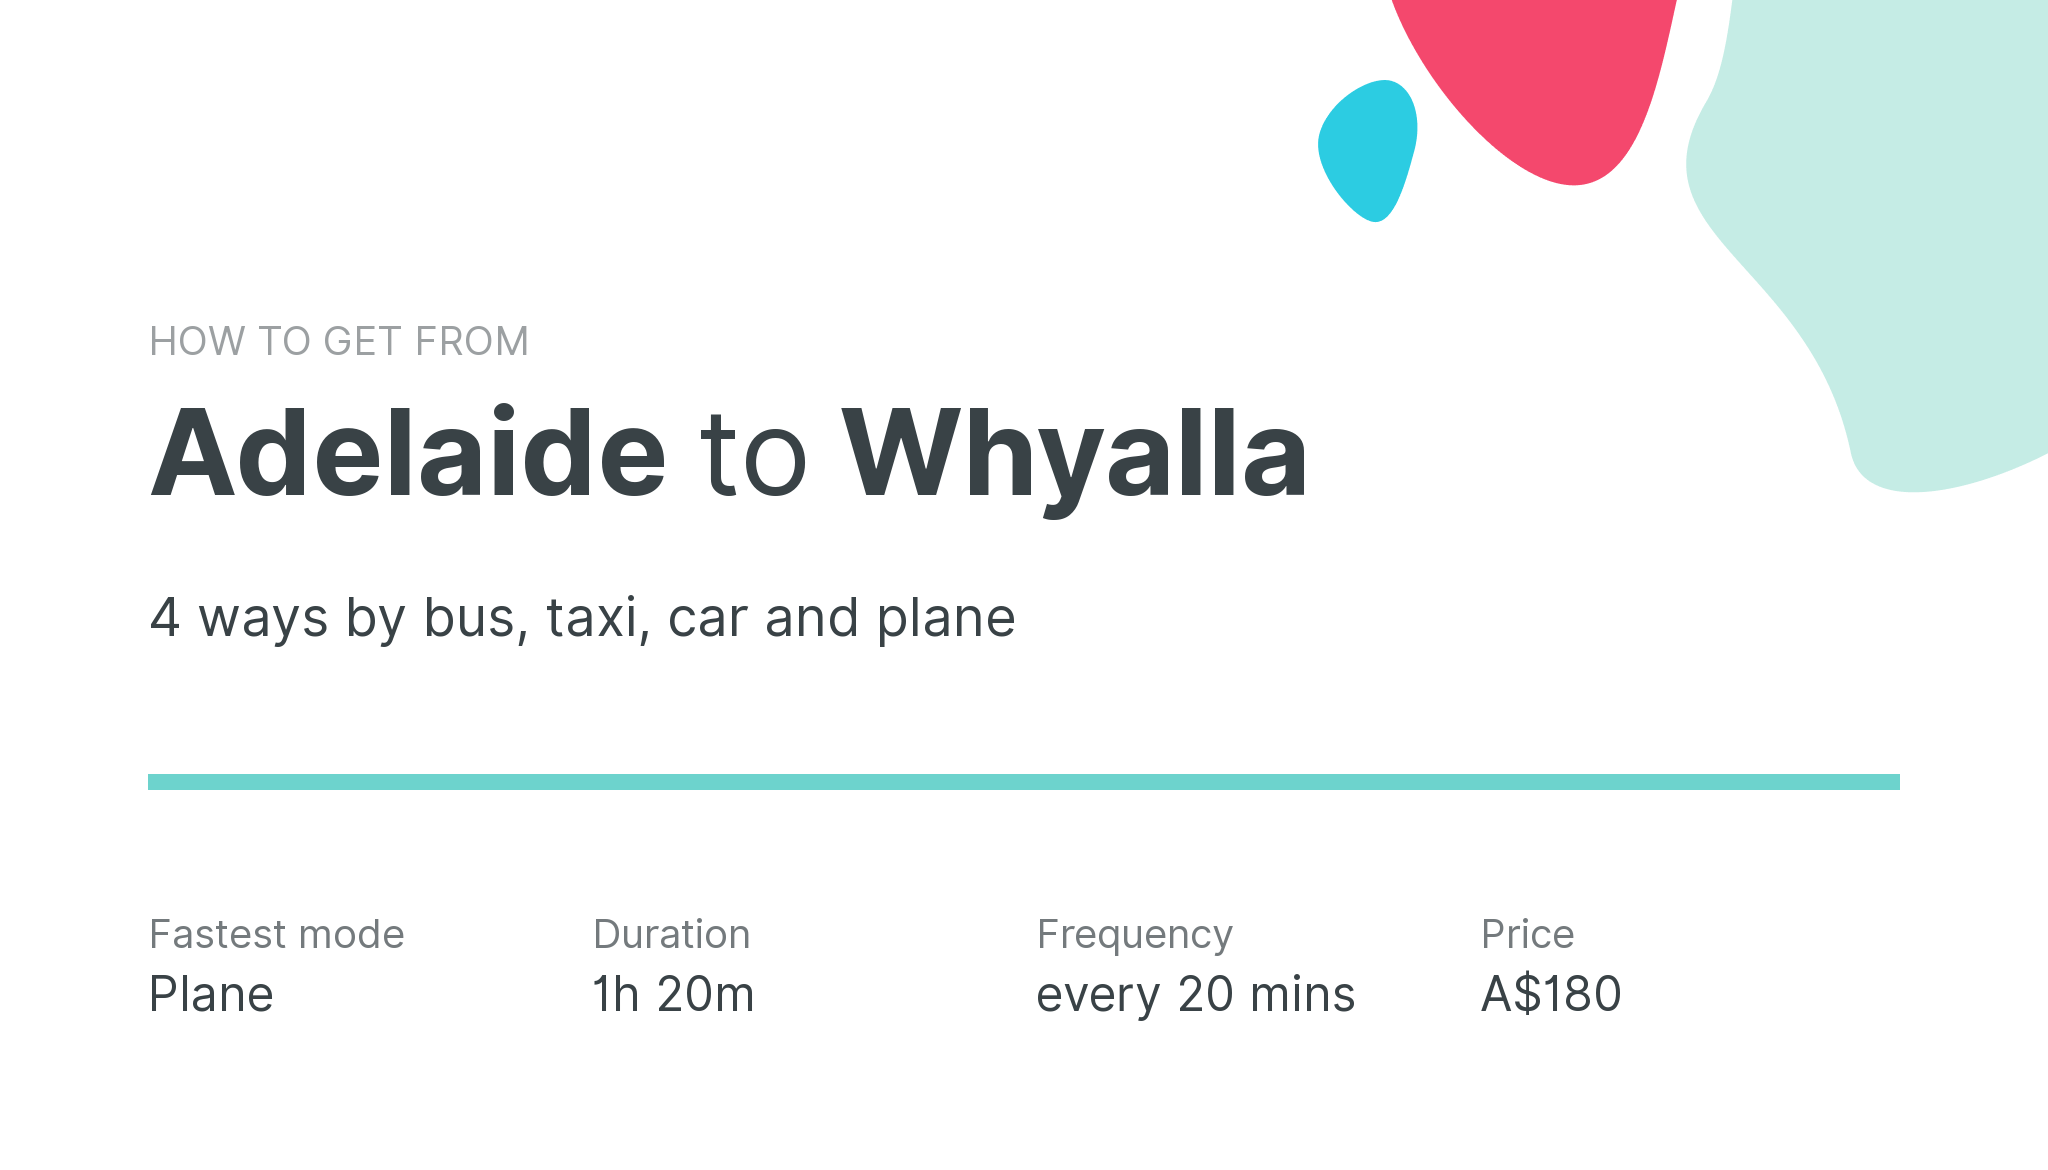 How do I get from Adelaide to Whyalla